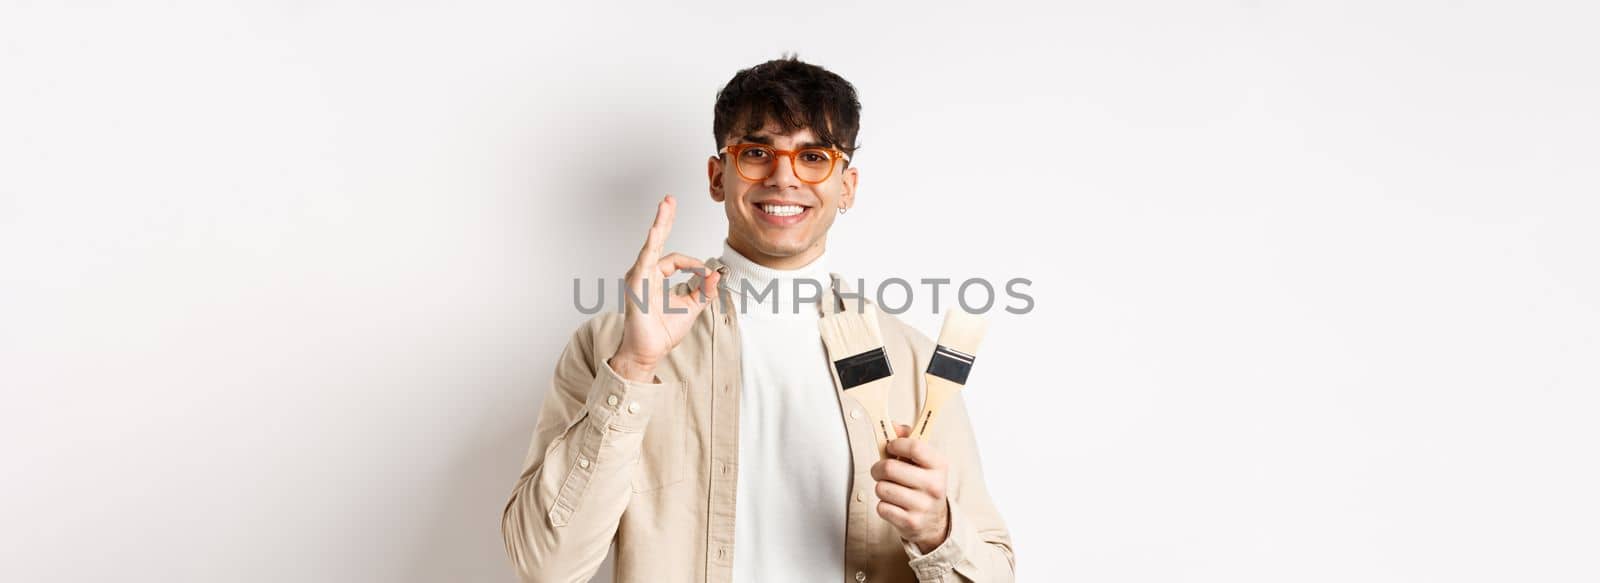 Handsome natural guy in glasses recommending store, showing painting brushes for renovation and decor, make okay sign in approval, standing on white background.